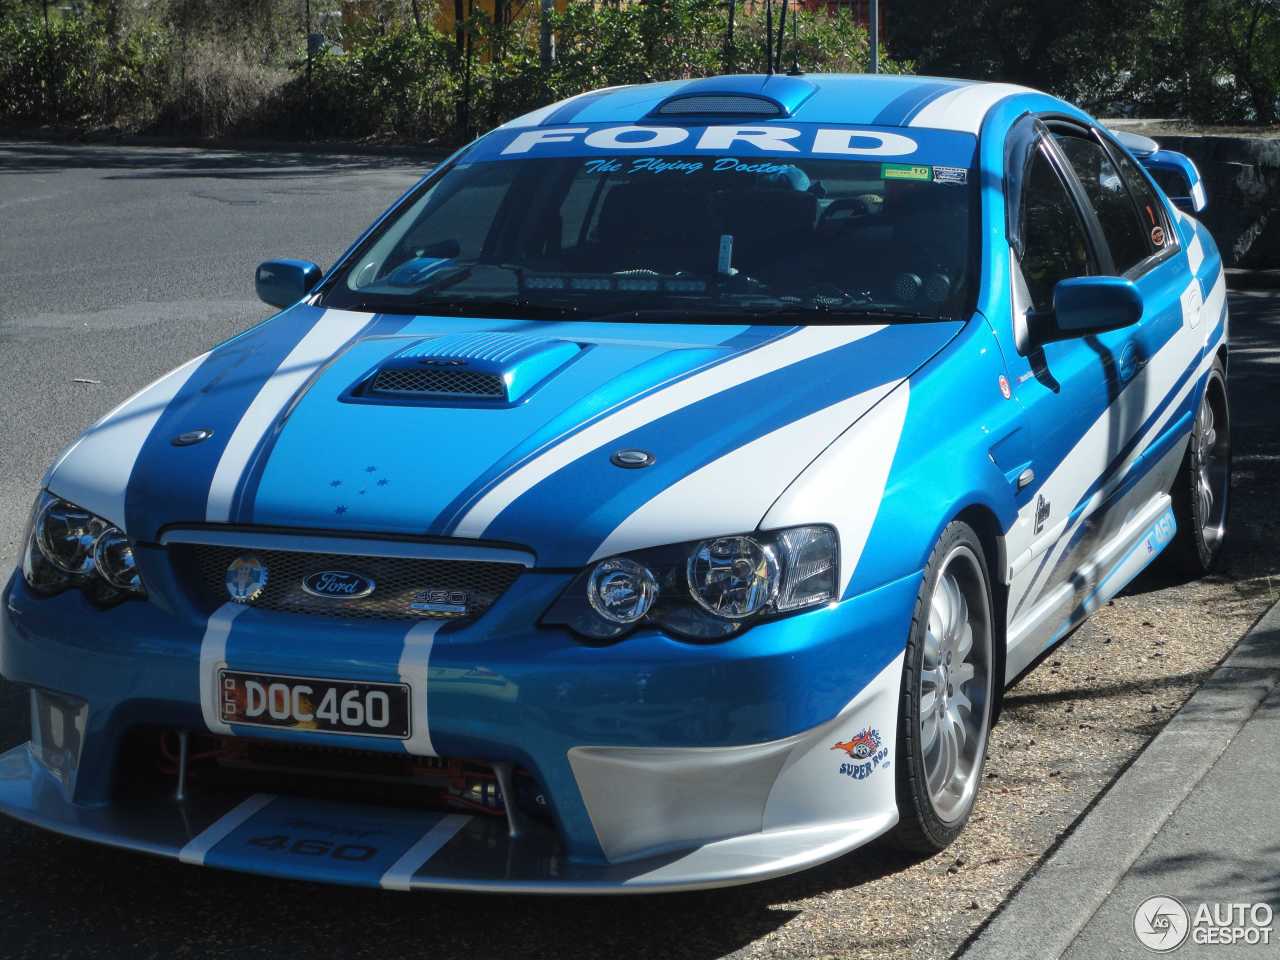 Ford Falcon 460 High Performance SCT Flying Doctor